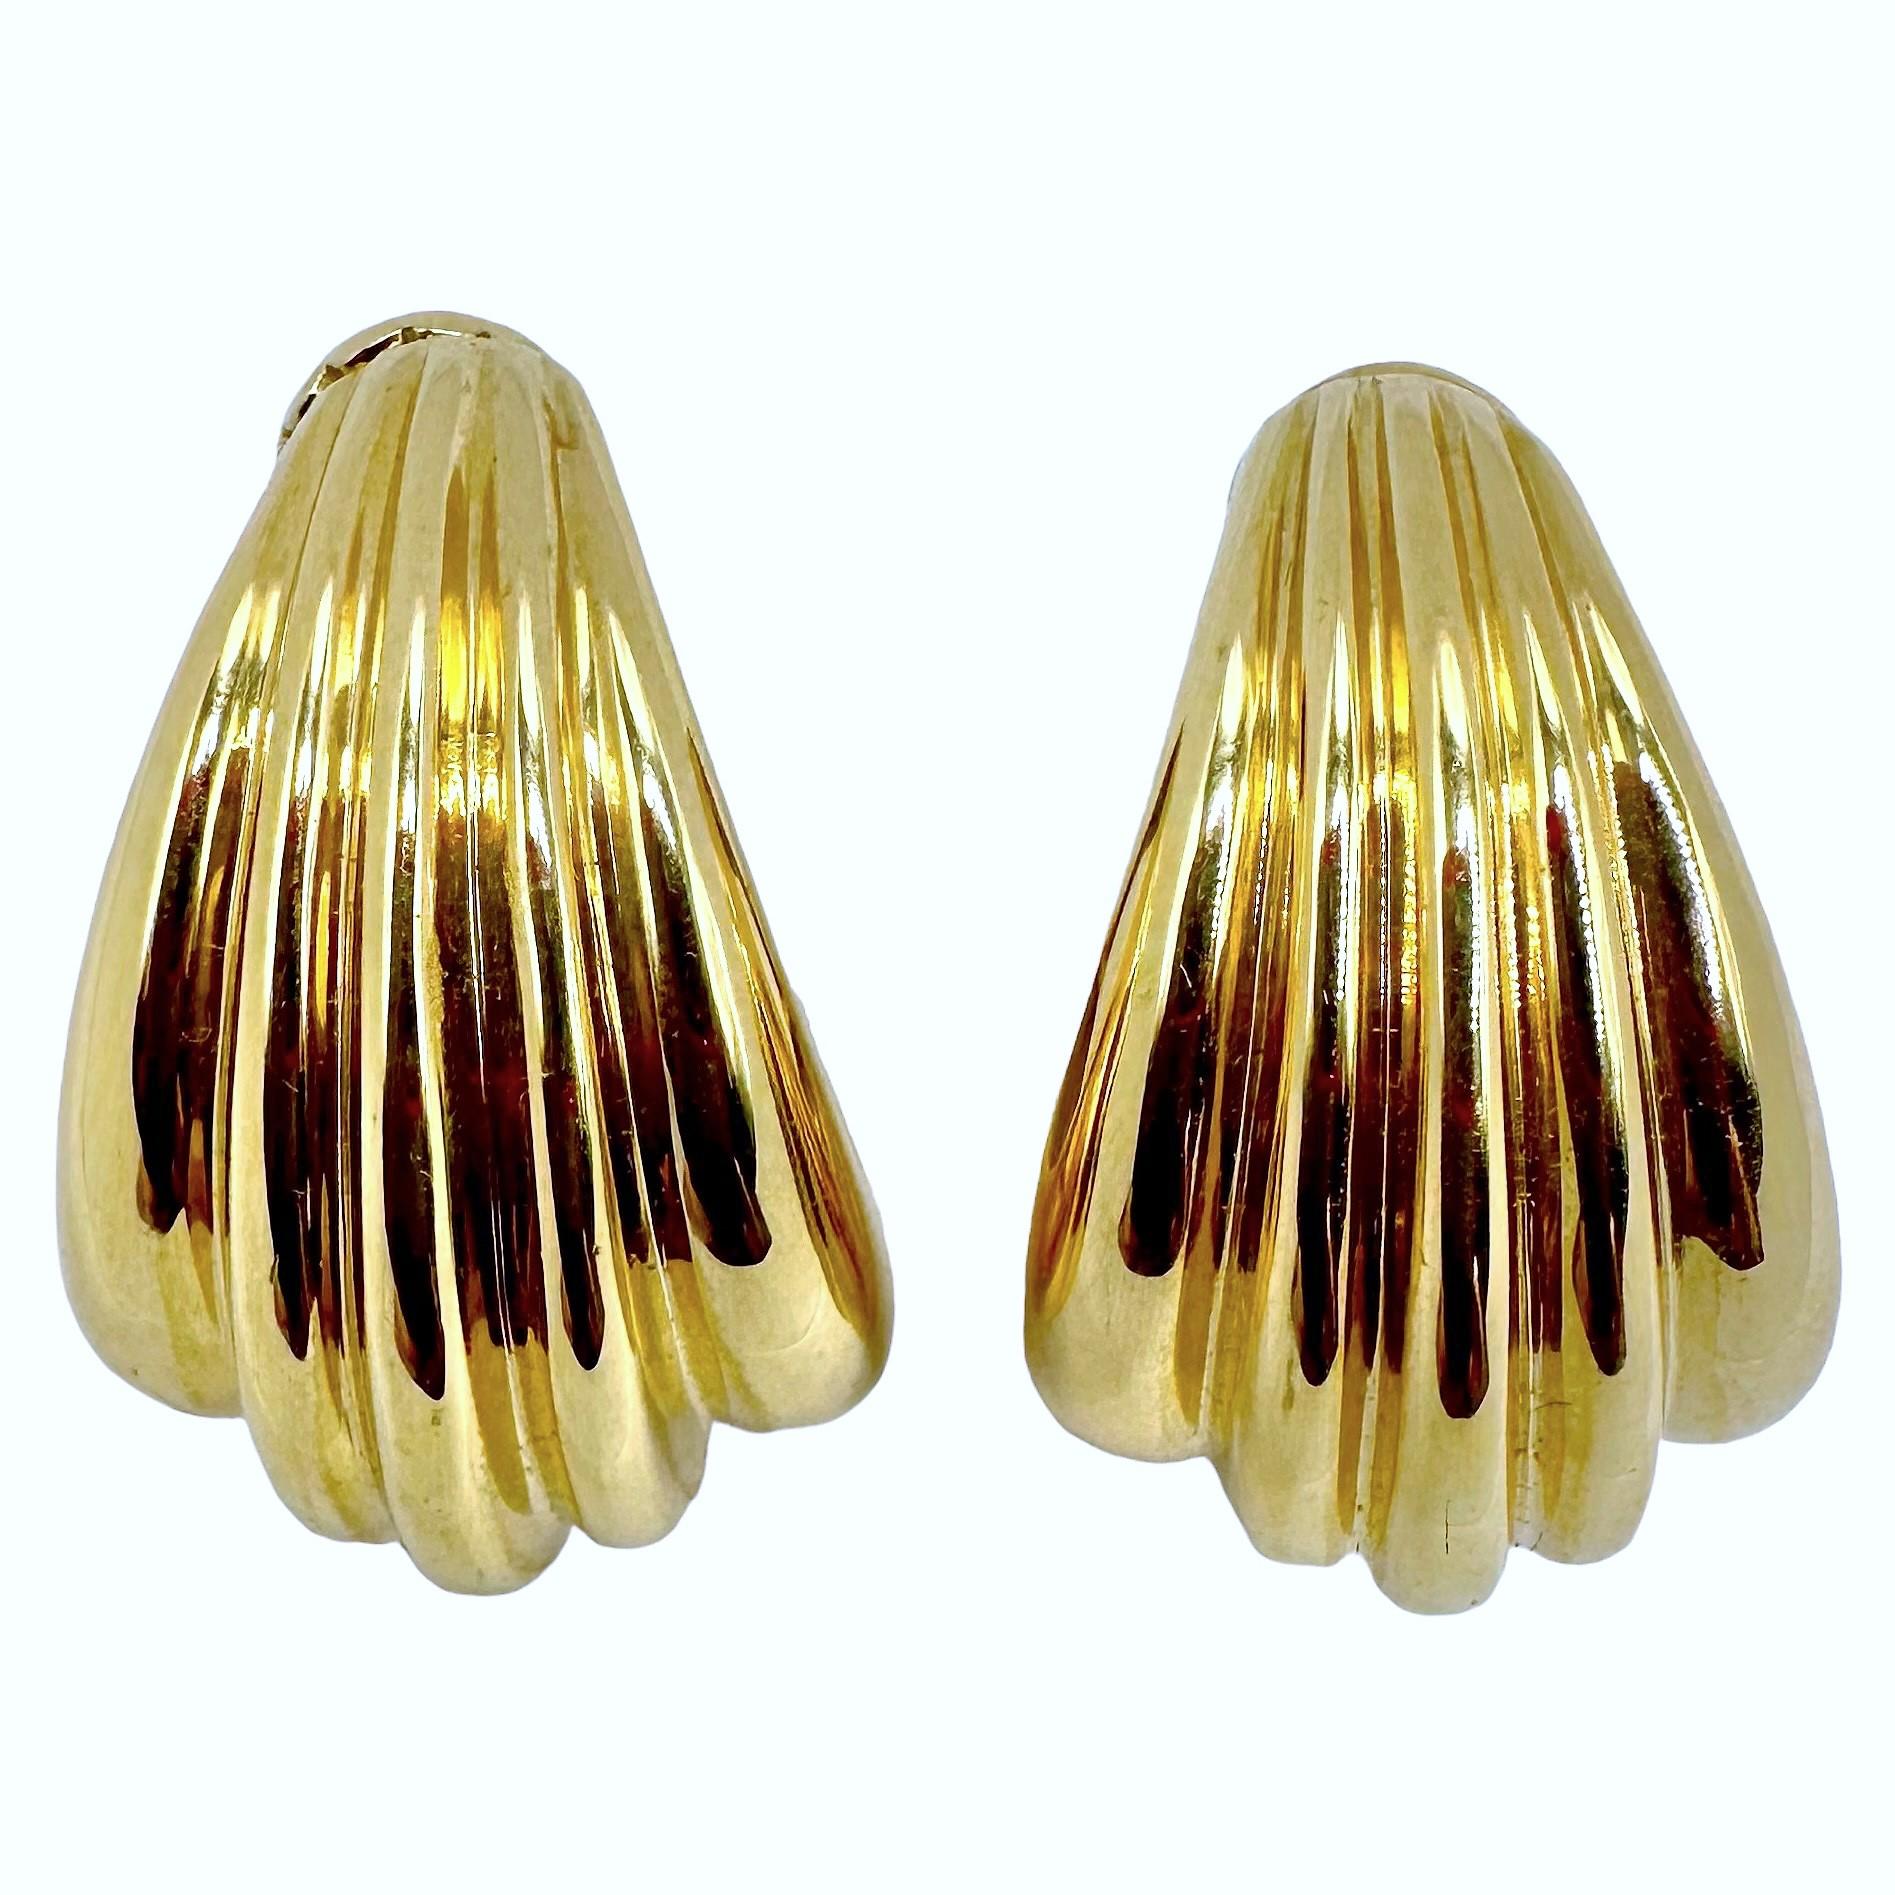 This tasteful pair of Cartier fluted hoop earrings would be a welcome addition to any lady's fine jewelry collection. Measuring  1 1/8 inches long by 
3/4 inch across at the widest point. The earring clips are stamped 750 indicating 18K. On the rear